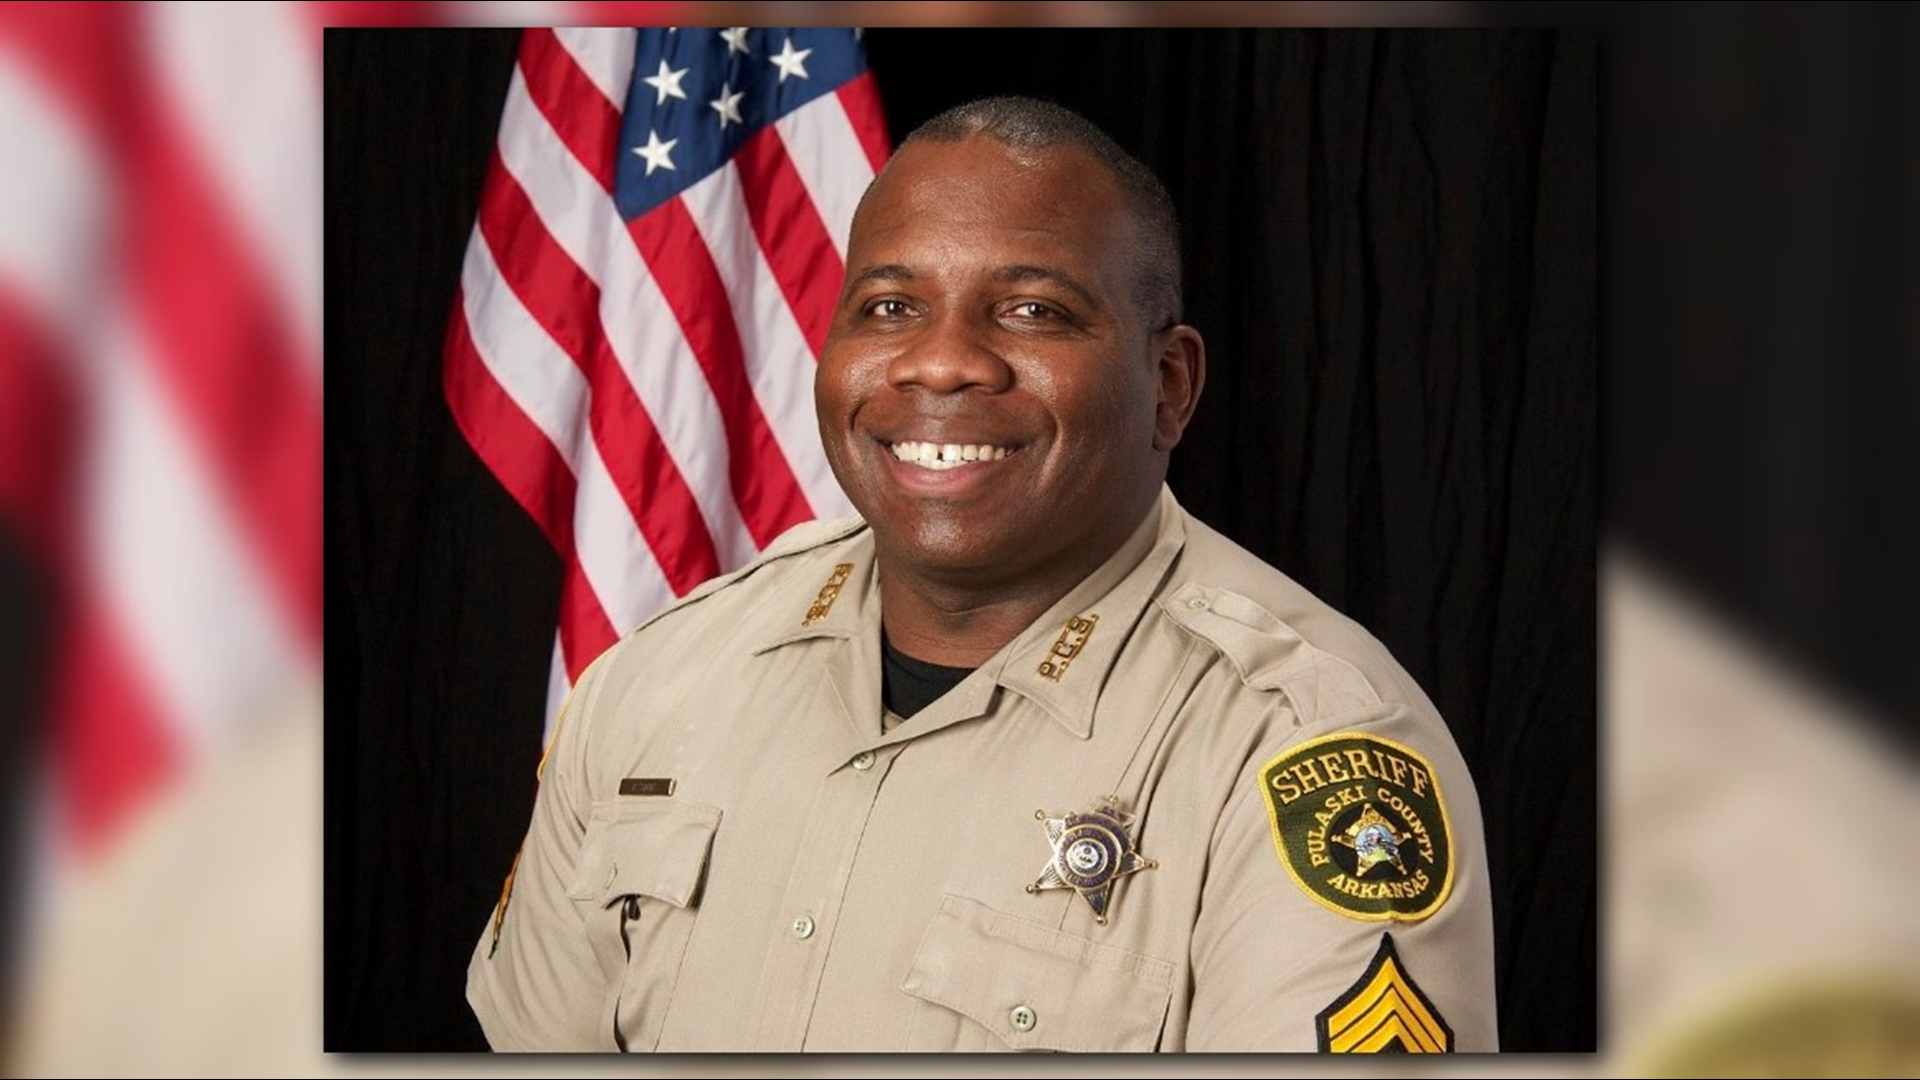 The Pulaski County Sheriff’s Office announced the death of Sergeant Bryant Starks.